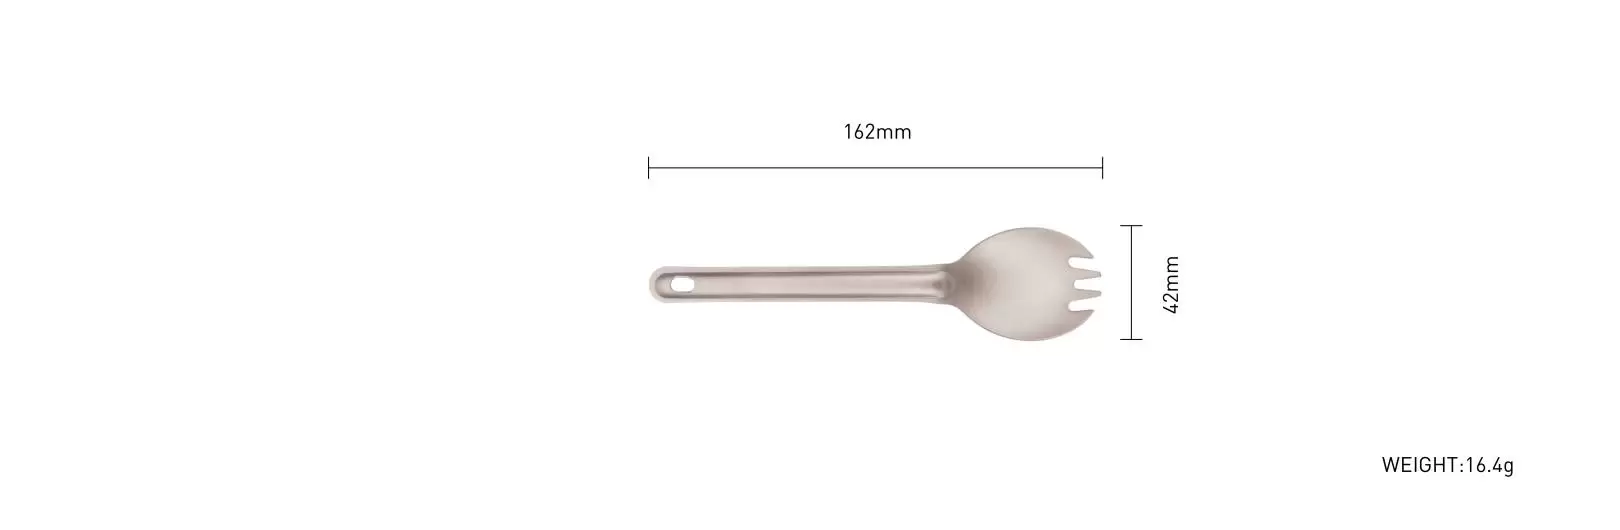 details of Camping Large Titanium Cystallation Cookware Spoon